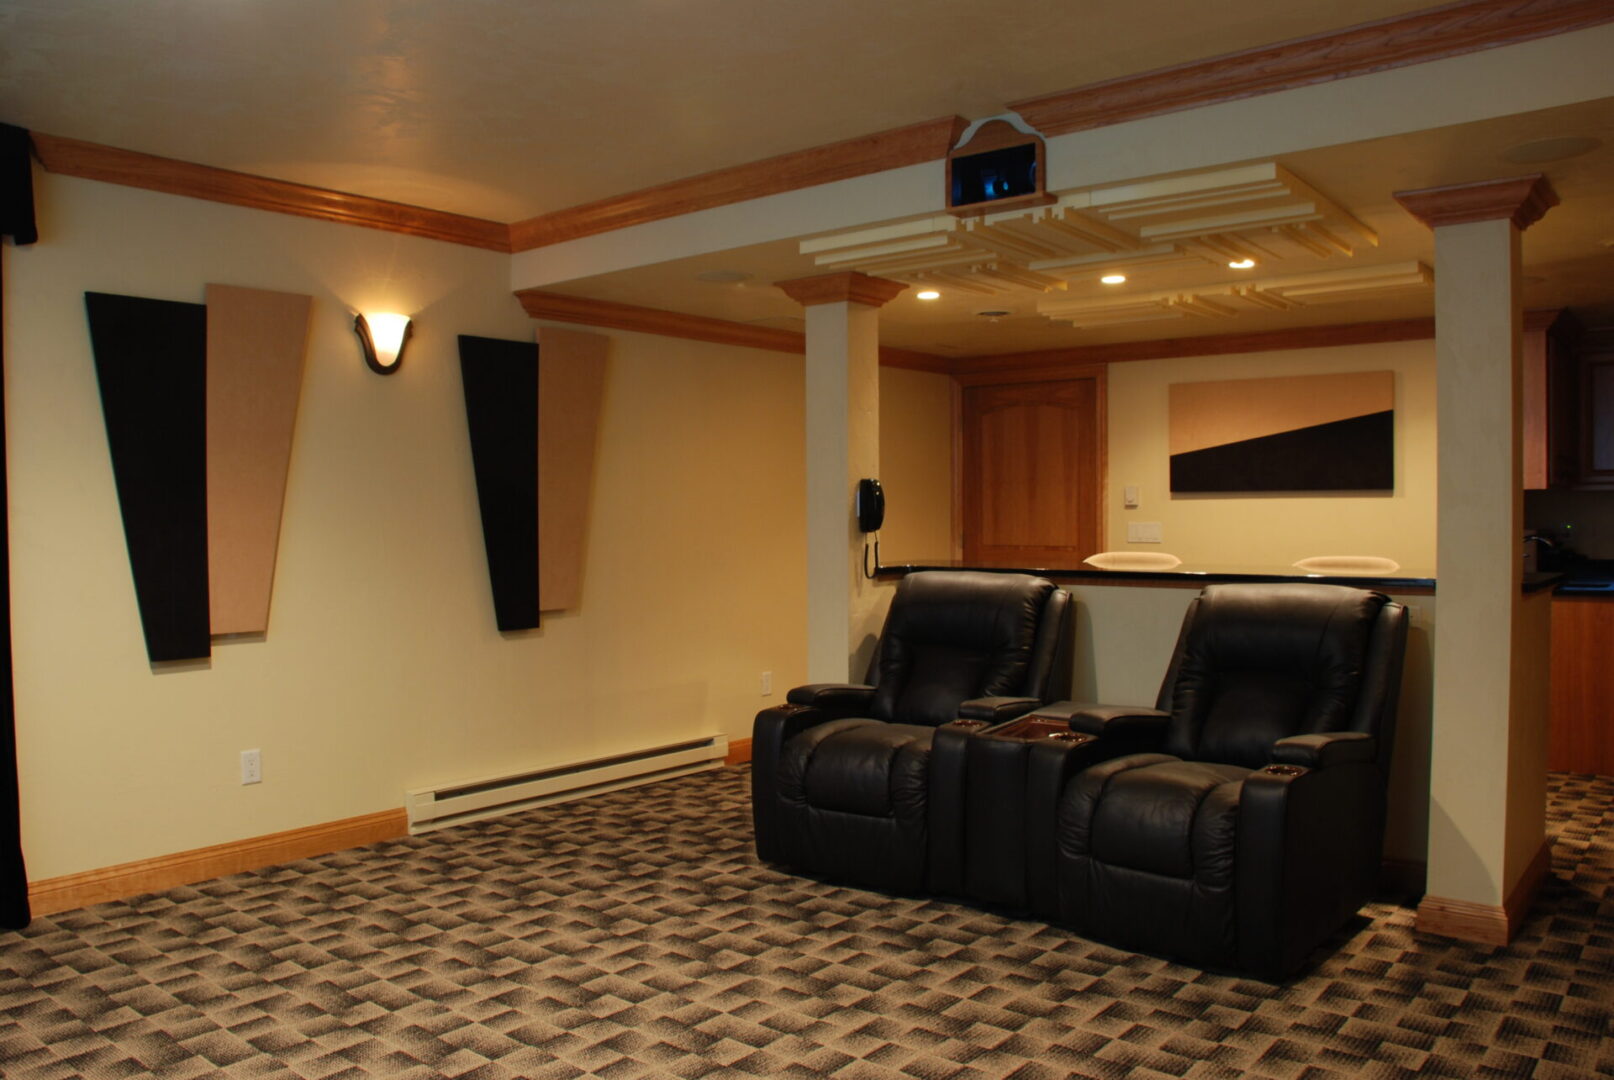 Two-person reclining couch at a home theater